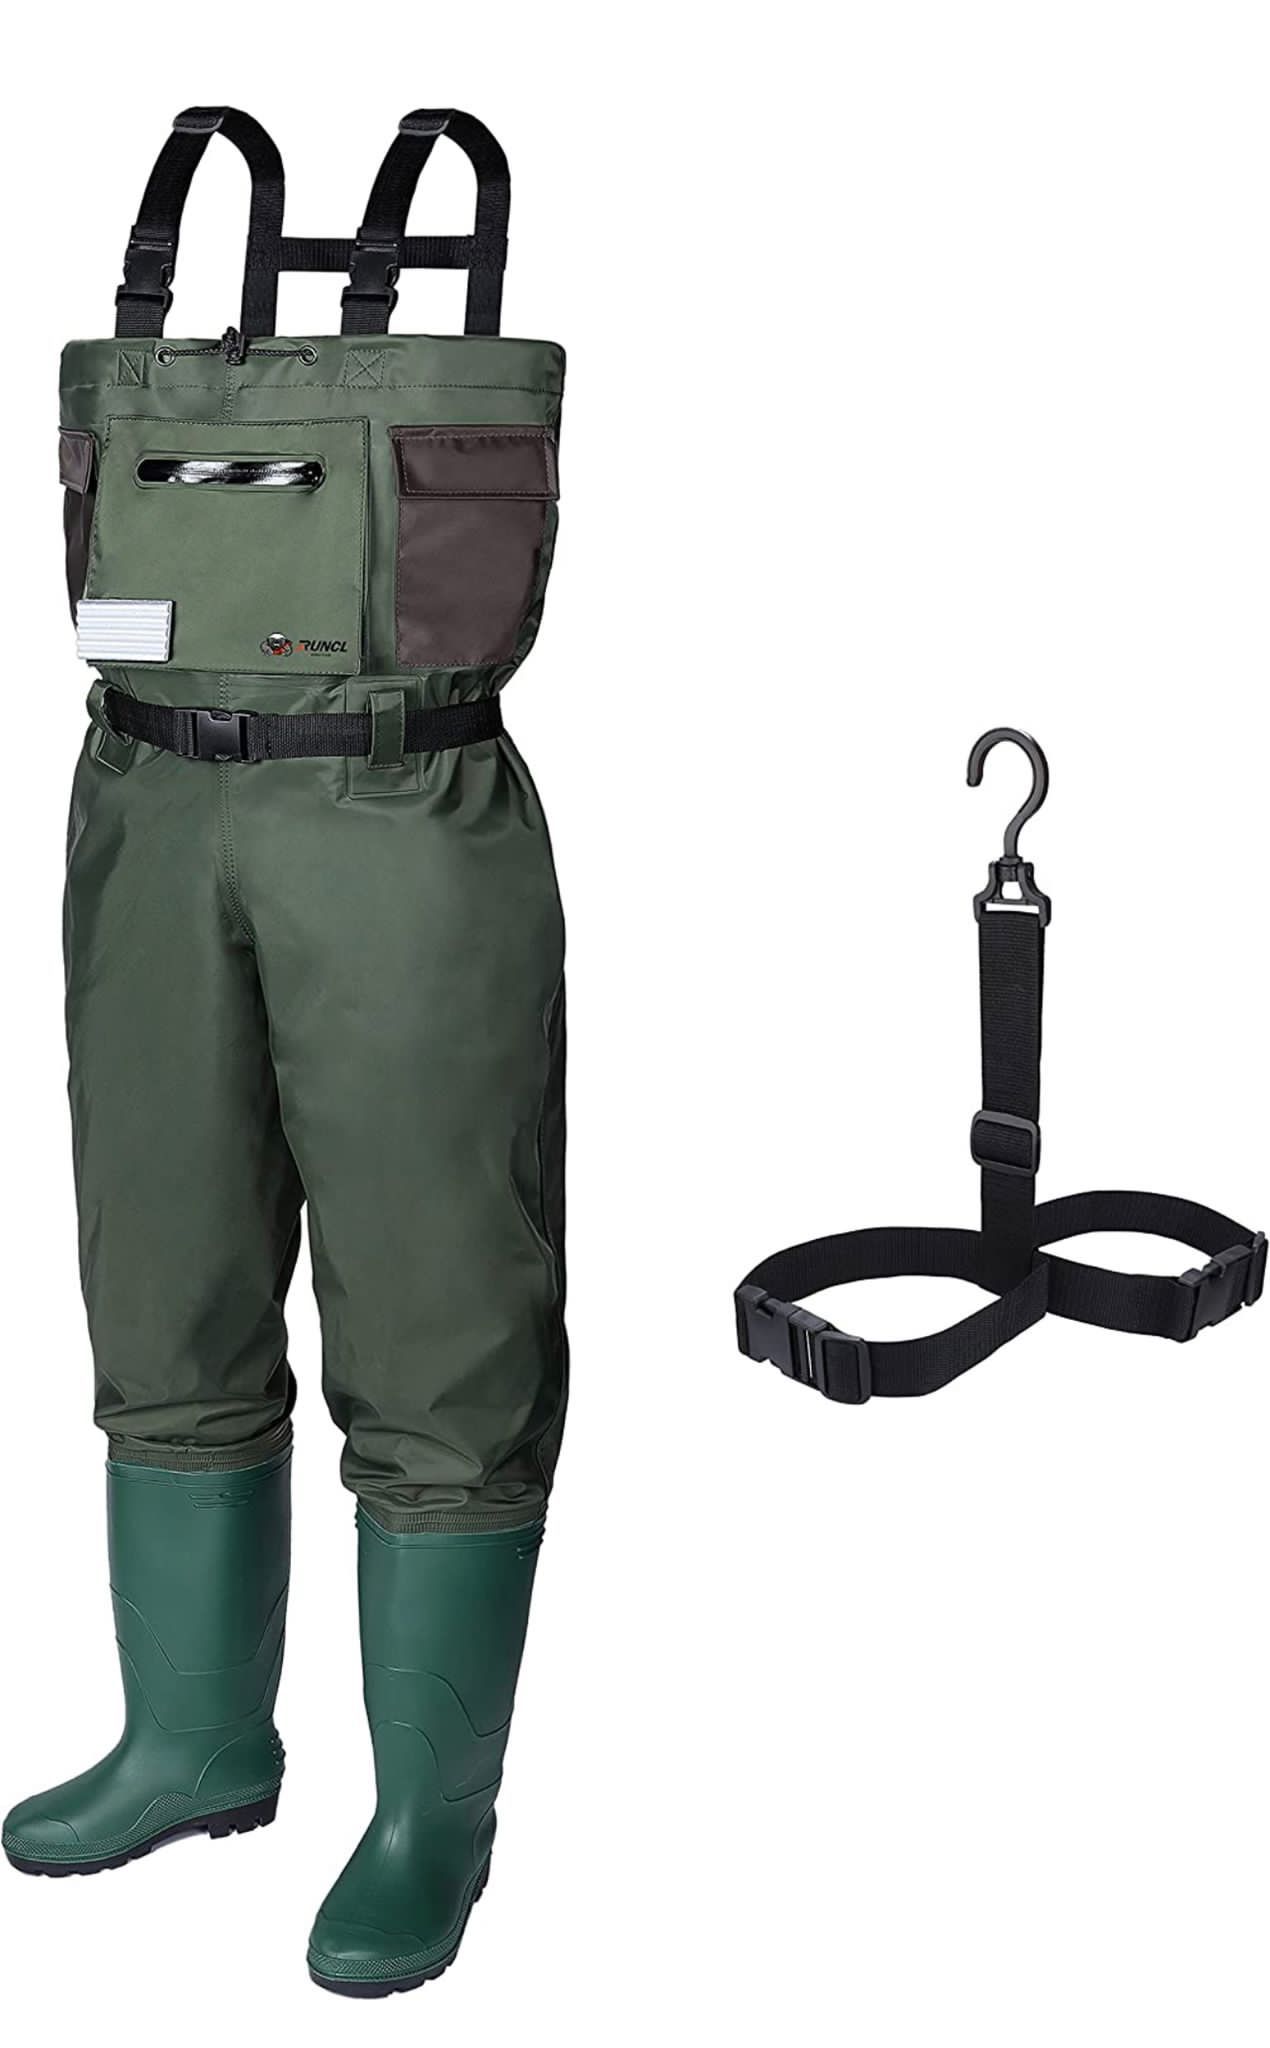 RUNCL Chest Waders with Boots Fishing Waders Waist-High Waders - Updated 400D Nylon Outer Seamless Breathable Tech Ergonomic Design Fly Patch - Wader 